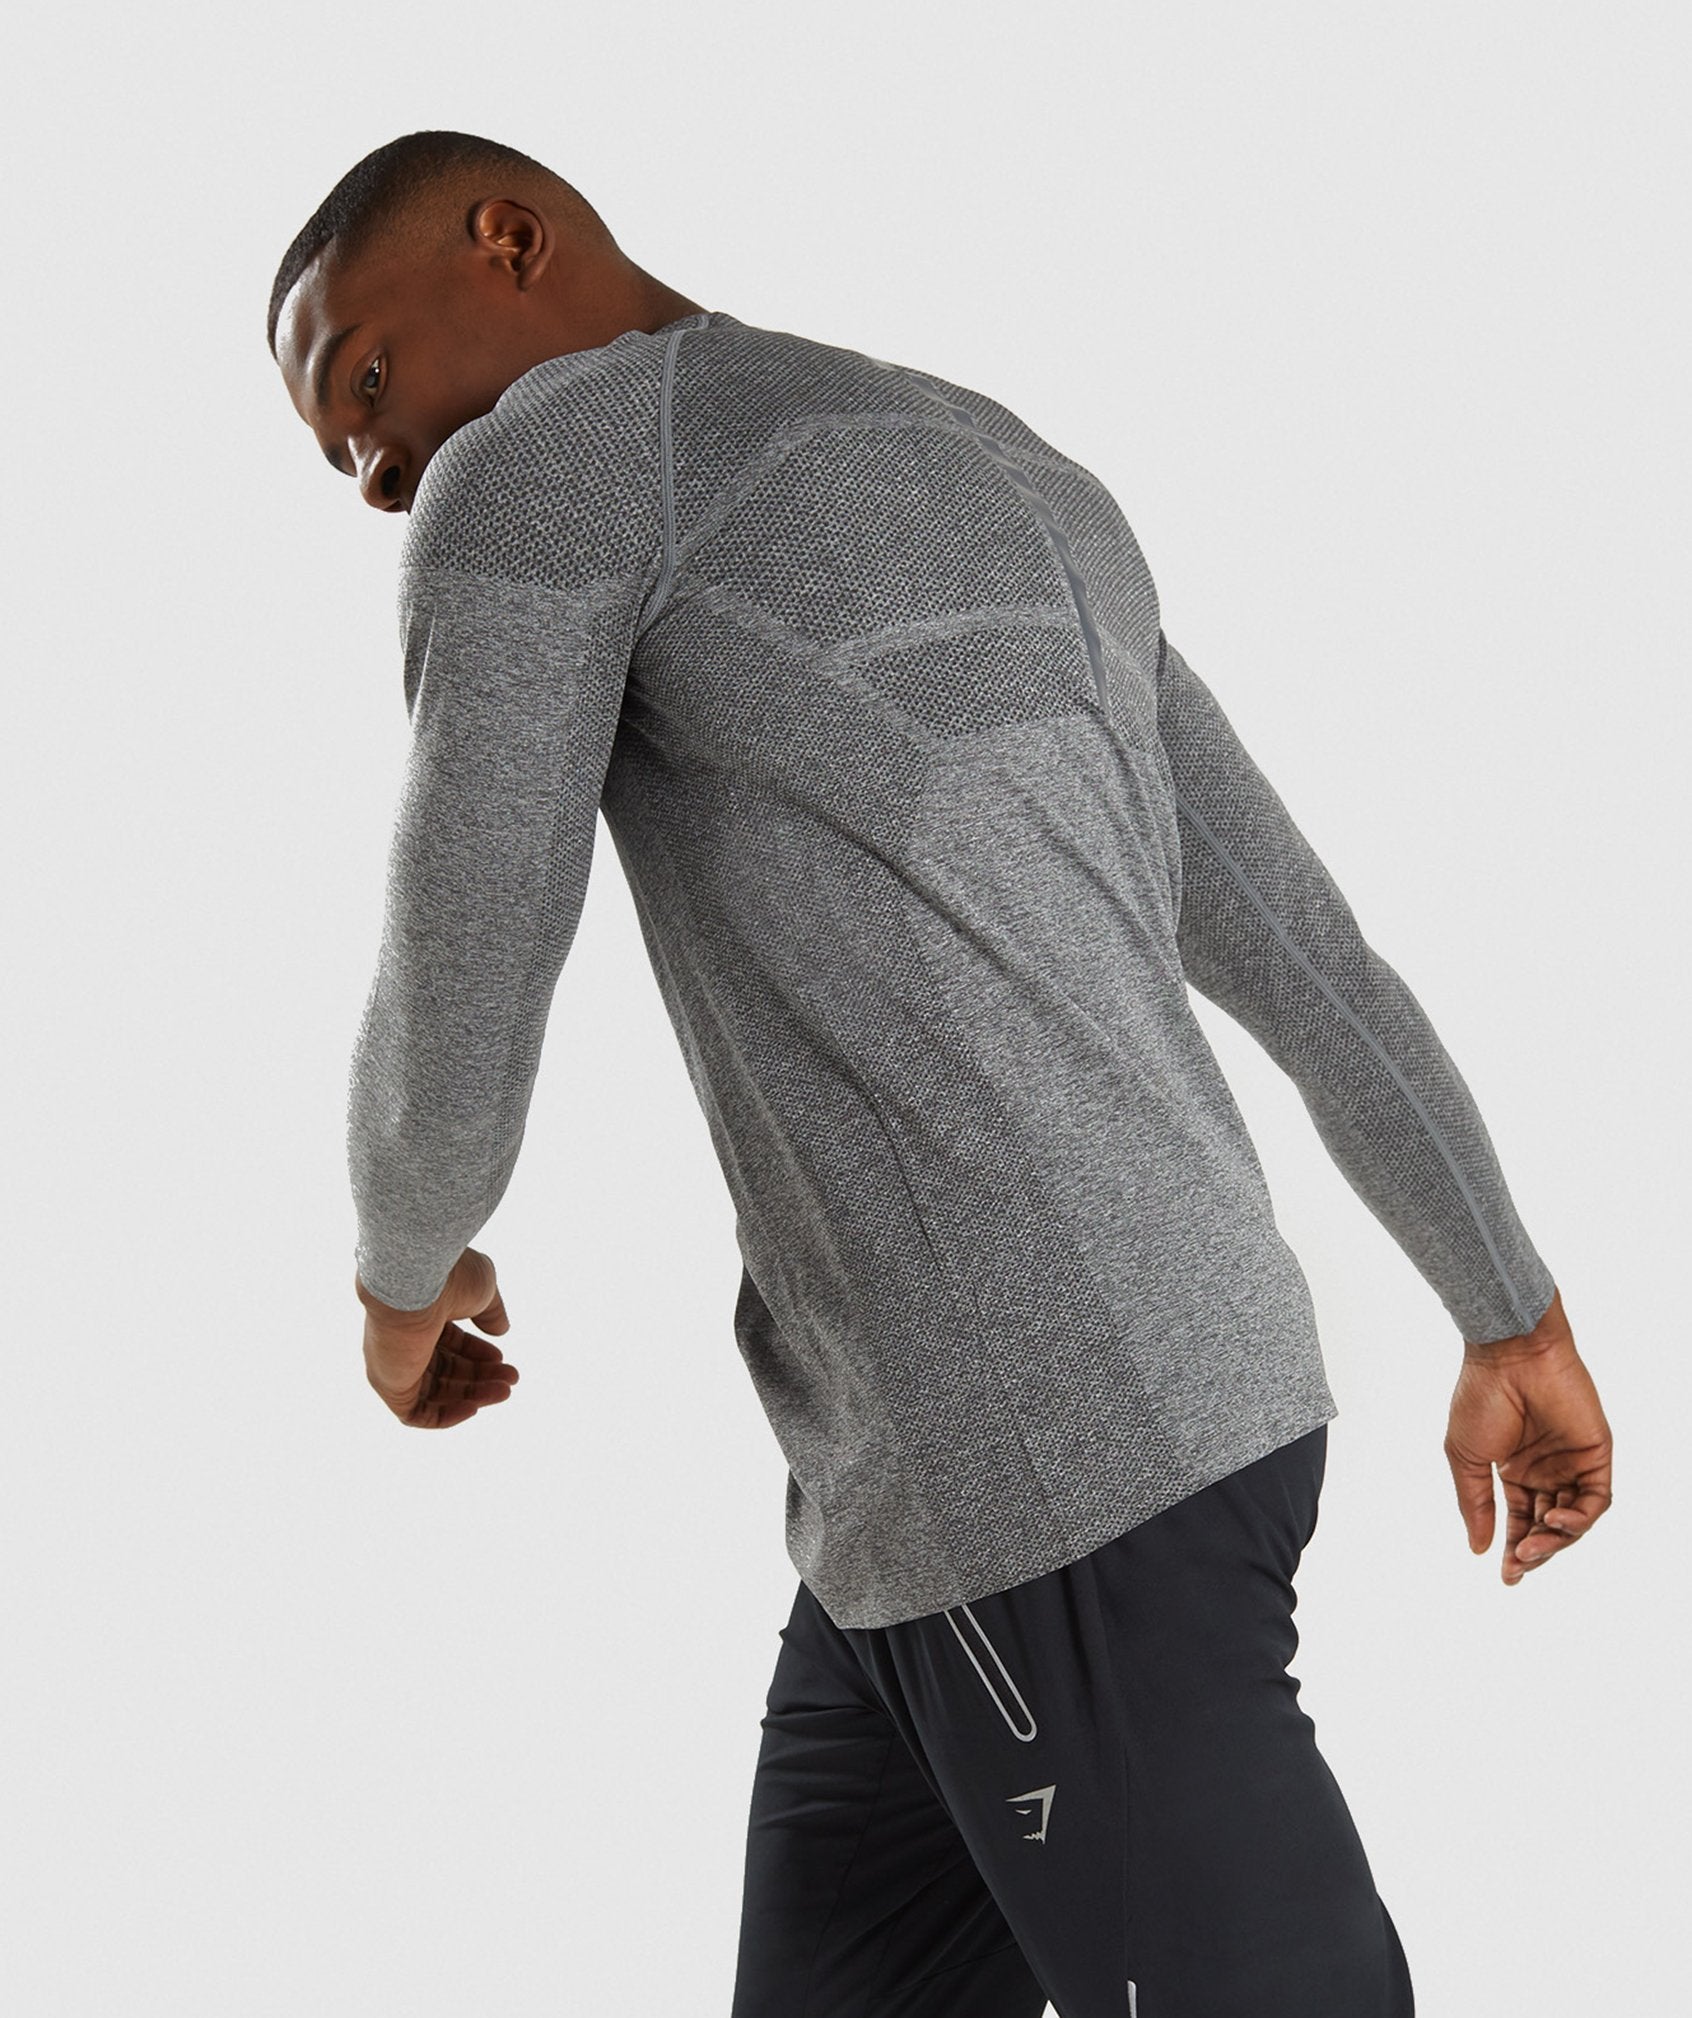 Shadow X Seamless Long Sleeve T-Shirt in Charcoal Marl - view 3